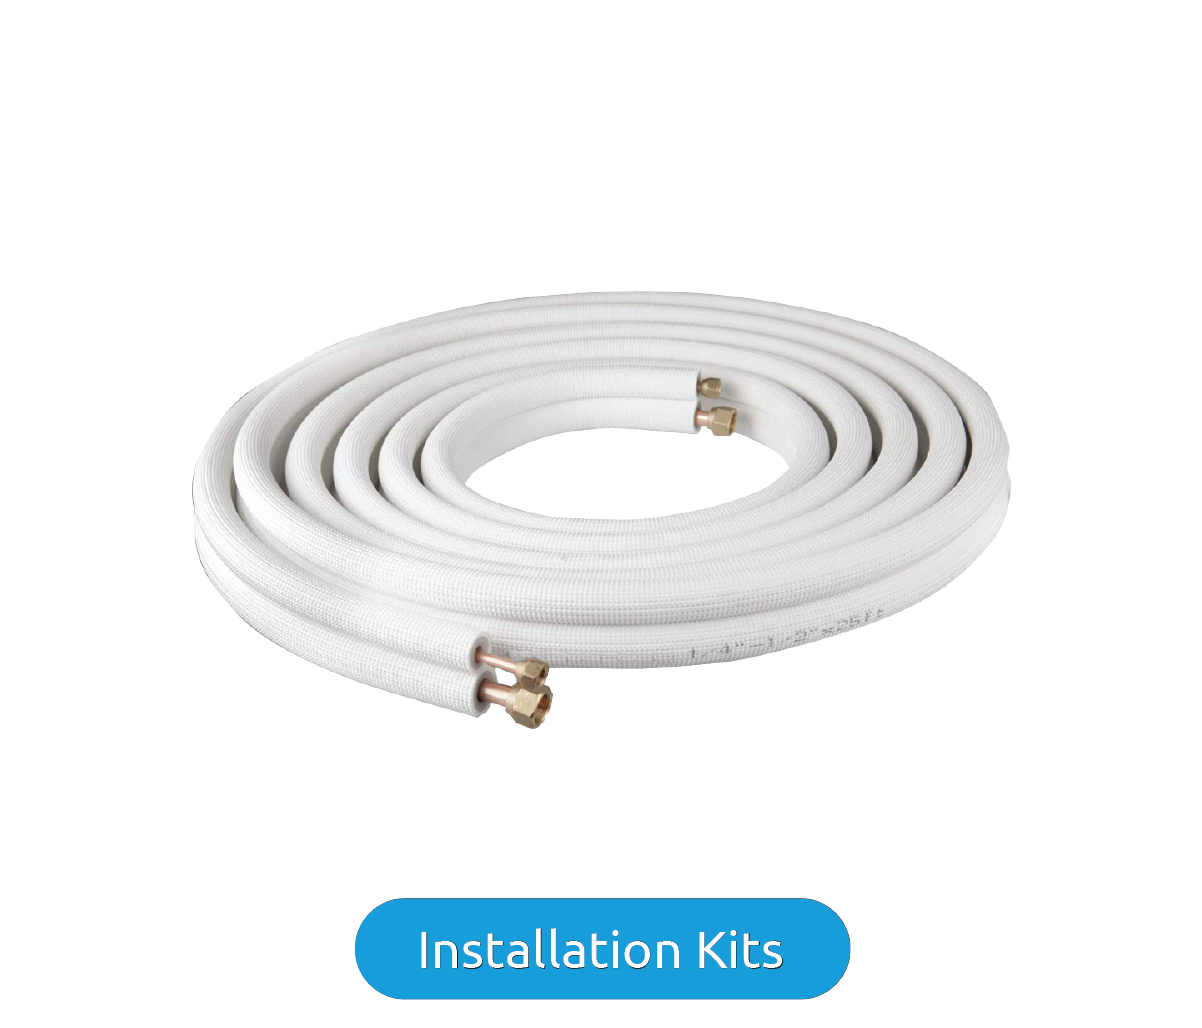 Air-Con 15 Foot Line Set with 3/8" Insulation - OT-1312-INSKIT